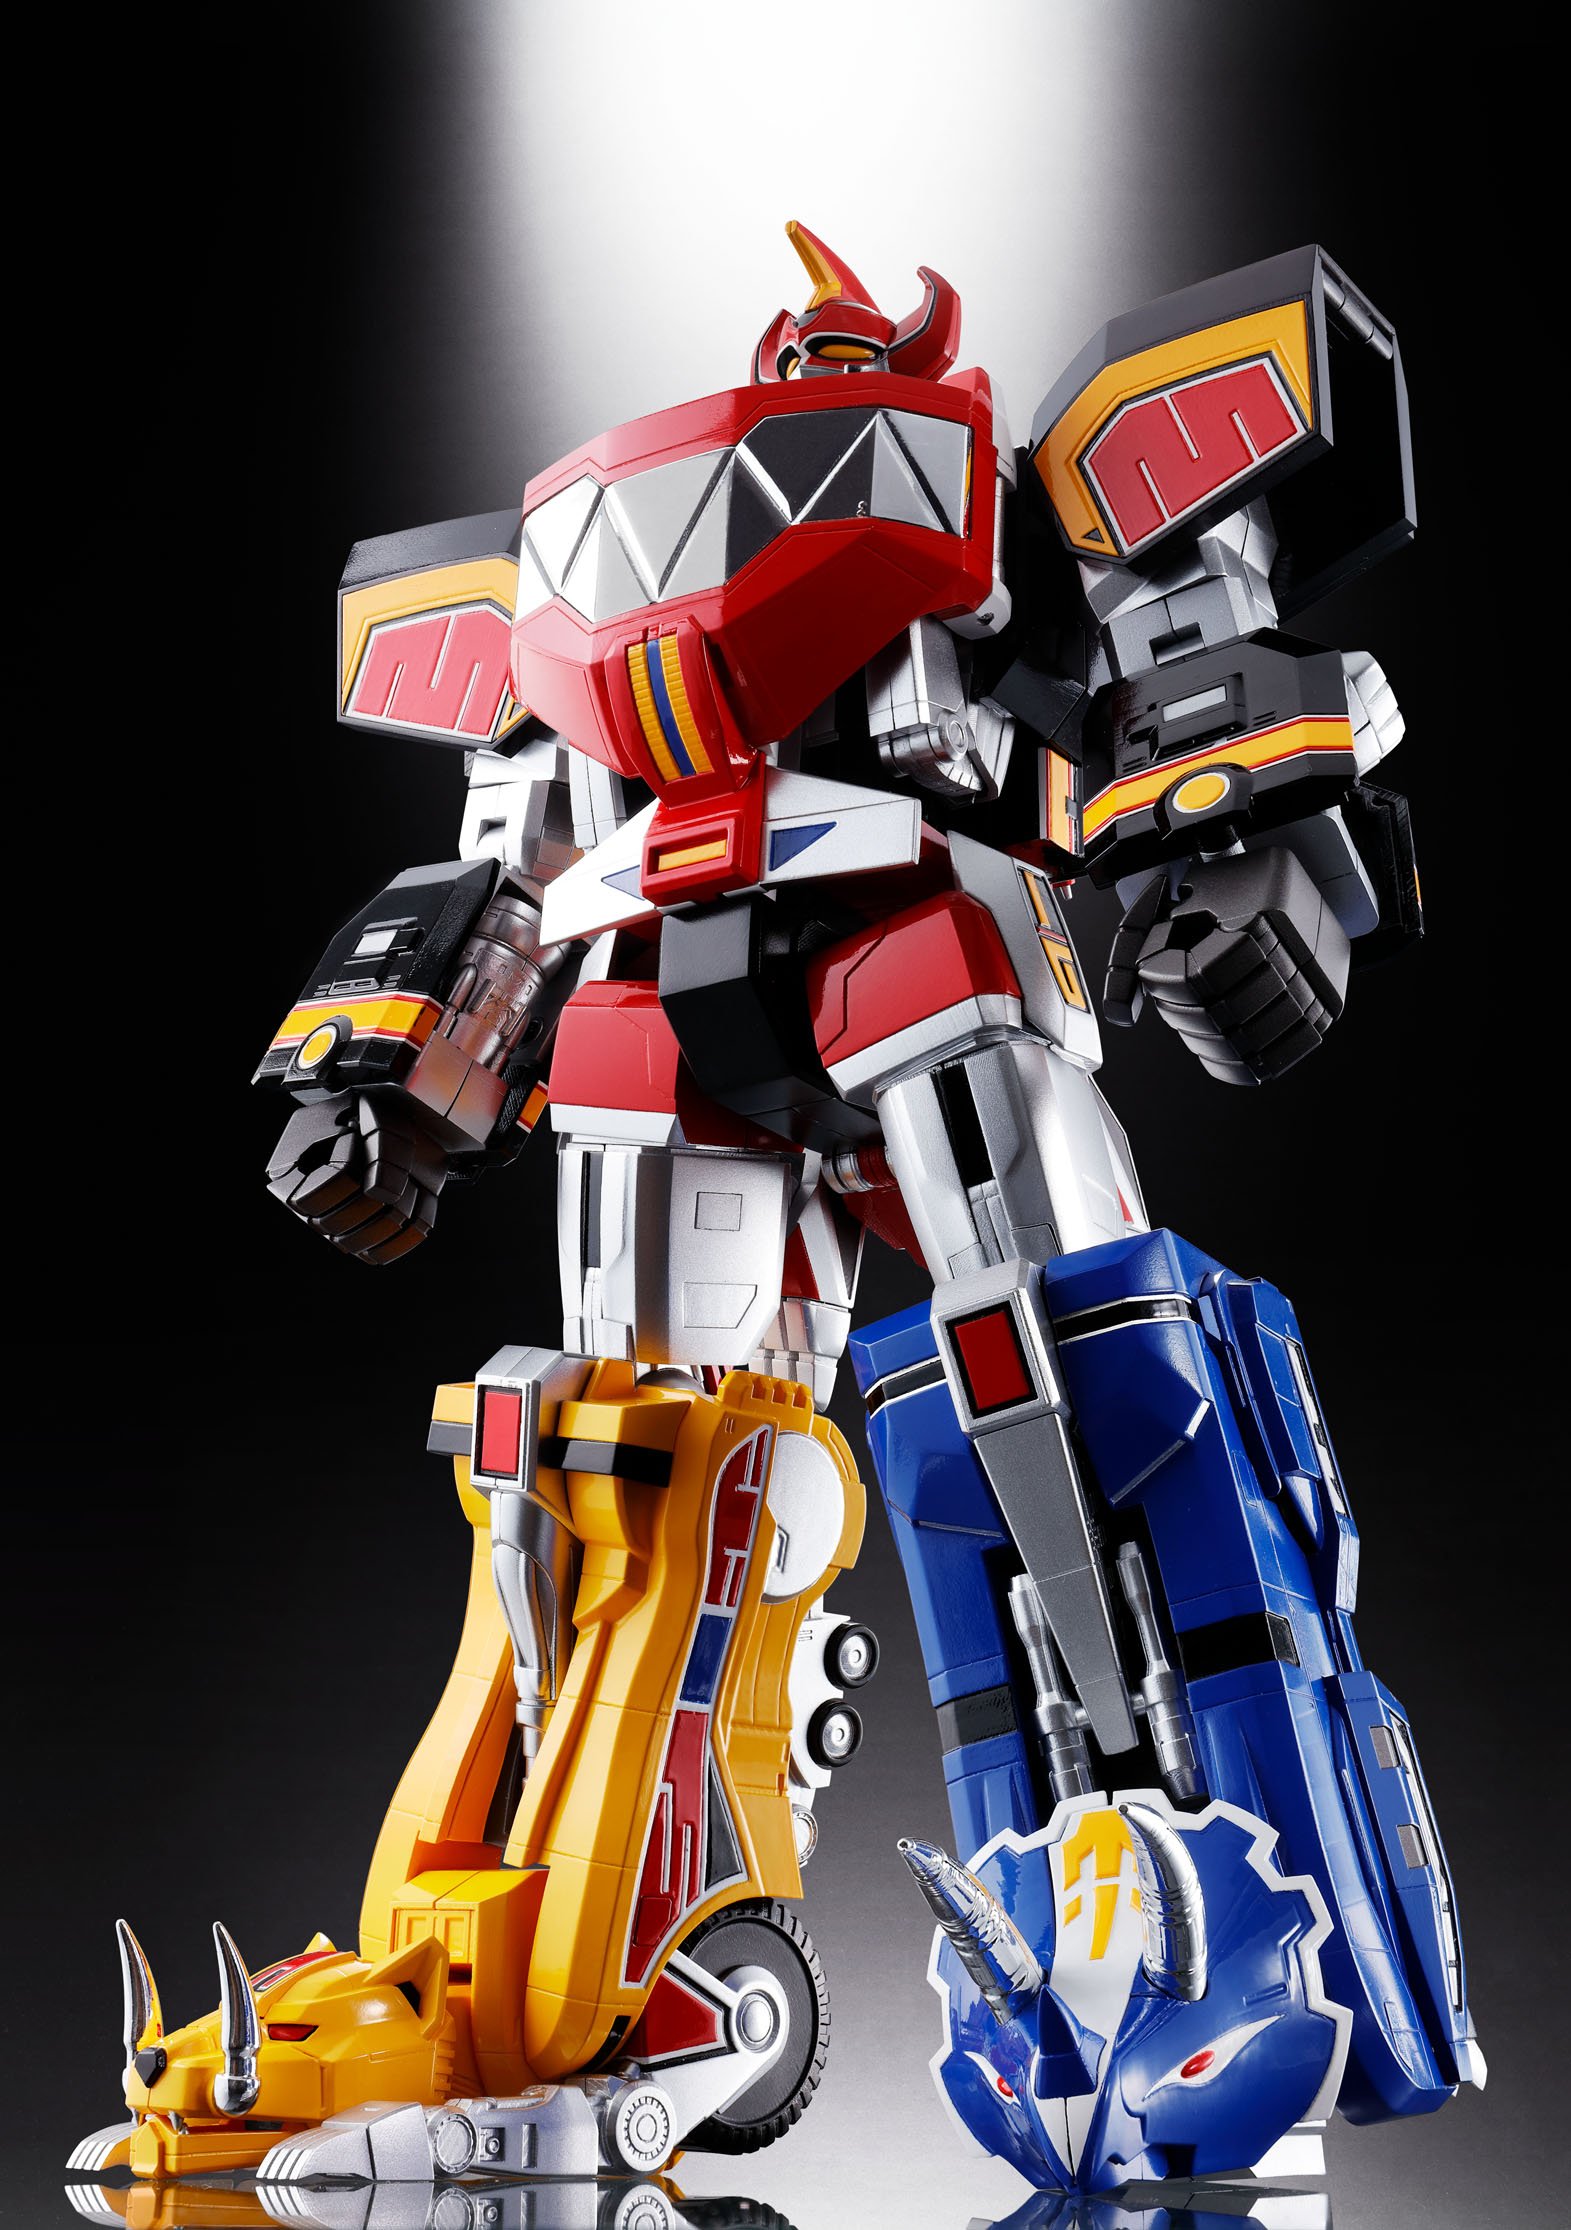 Bandai Tamashii Nations Soul of Chogokin Mighty Morphing Power Rangers Action Figure, for 150 months to 720 months